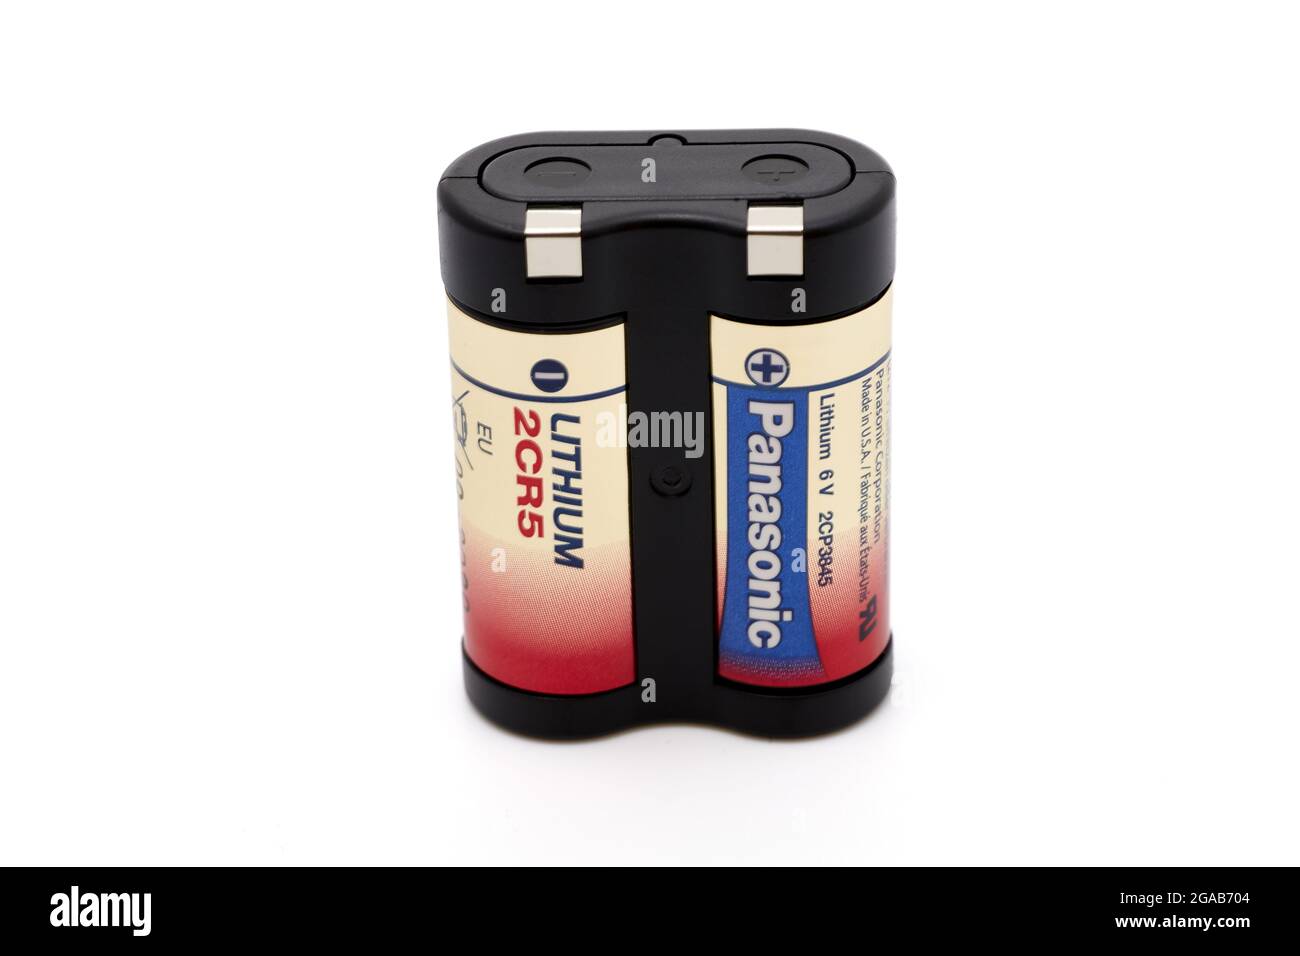 2CR5 lithium battery for analog camera Stock Photo - Alamy